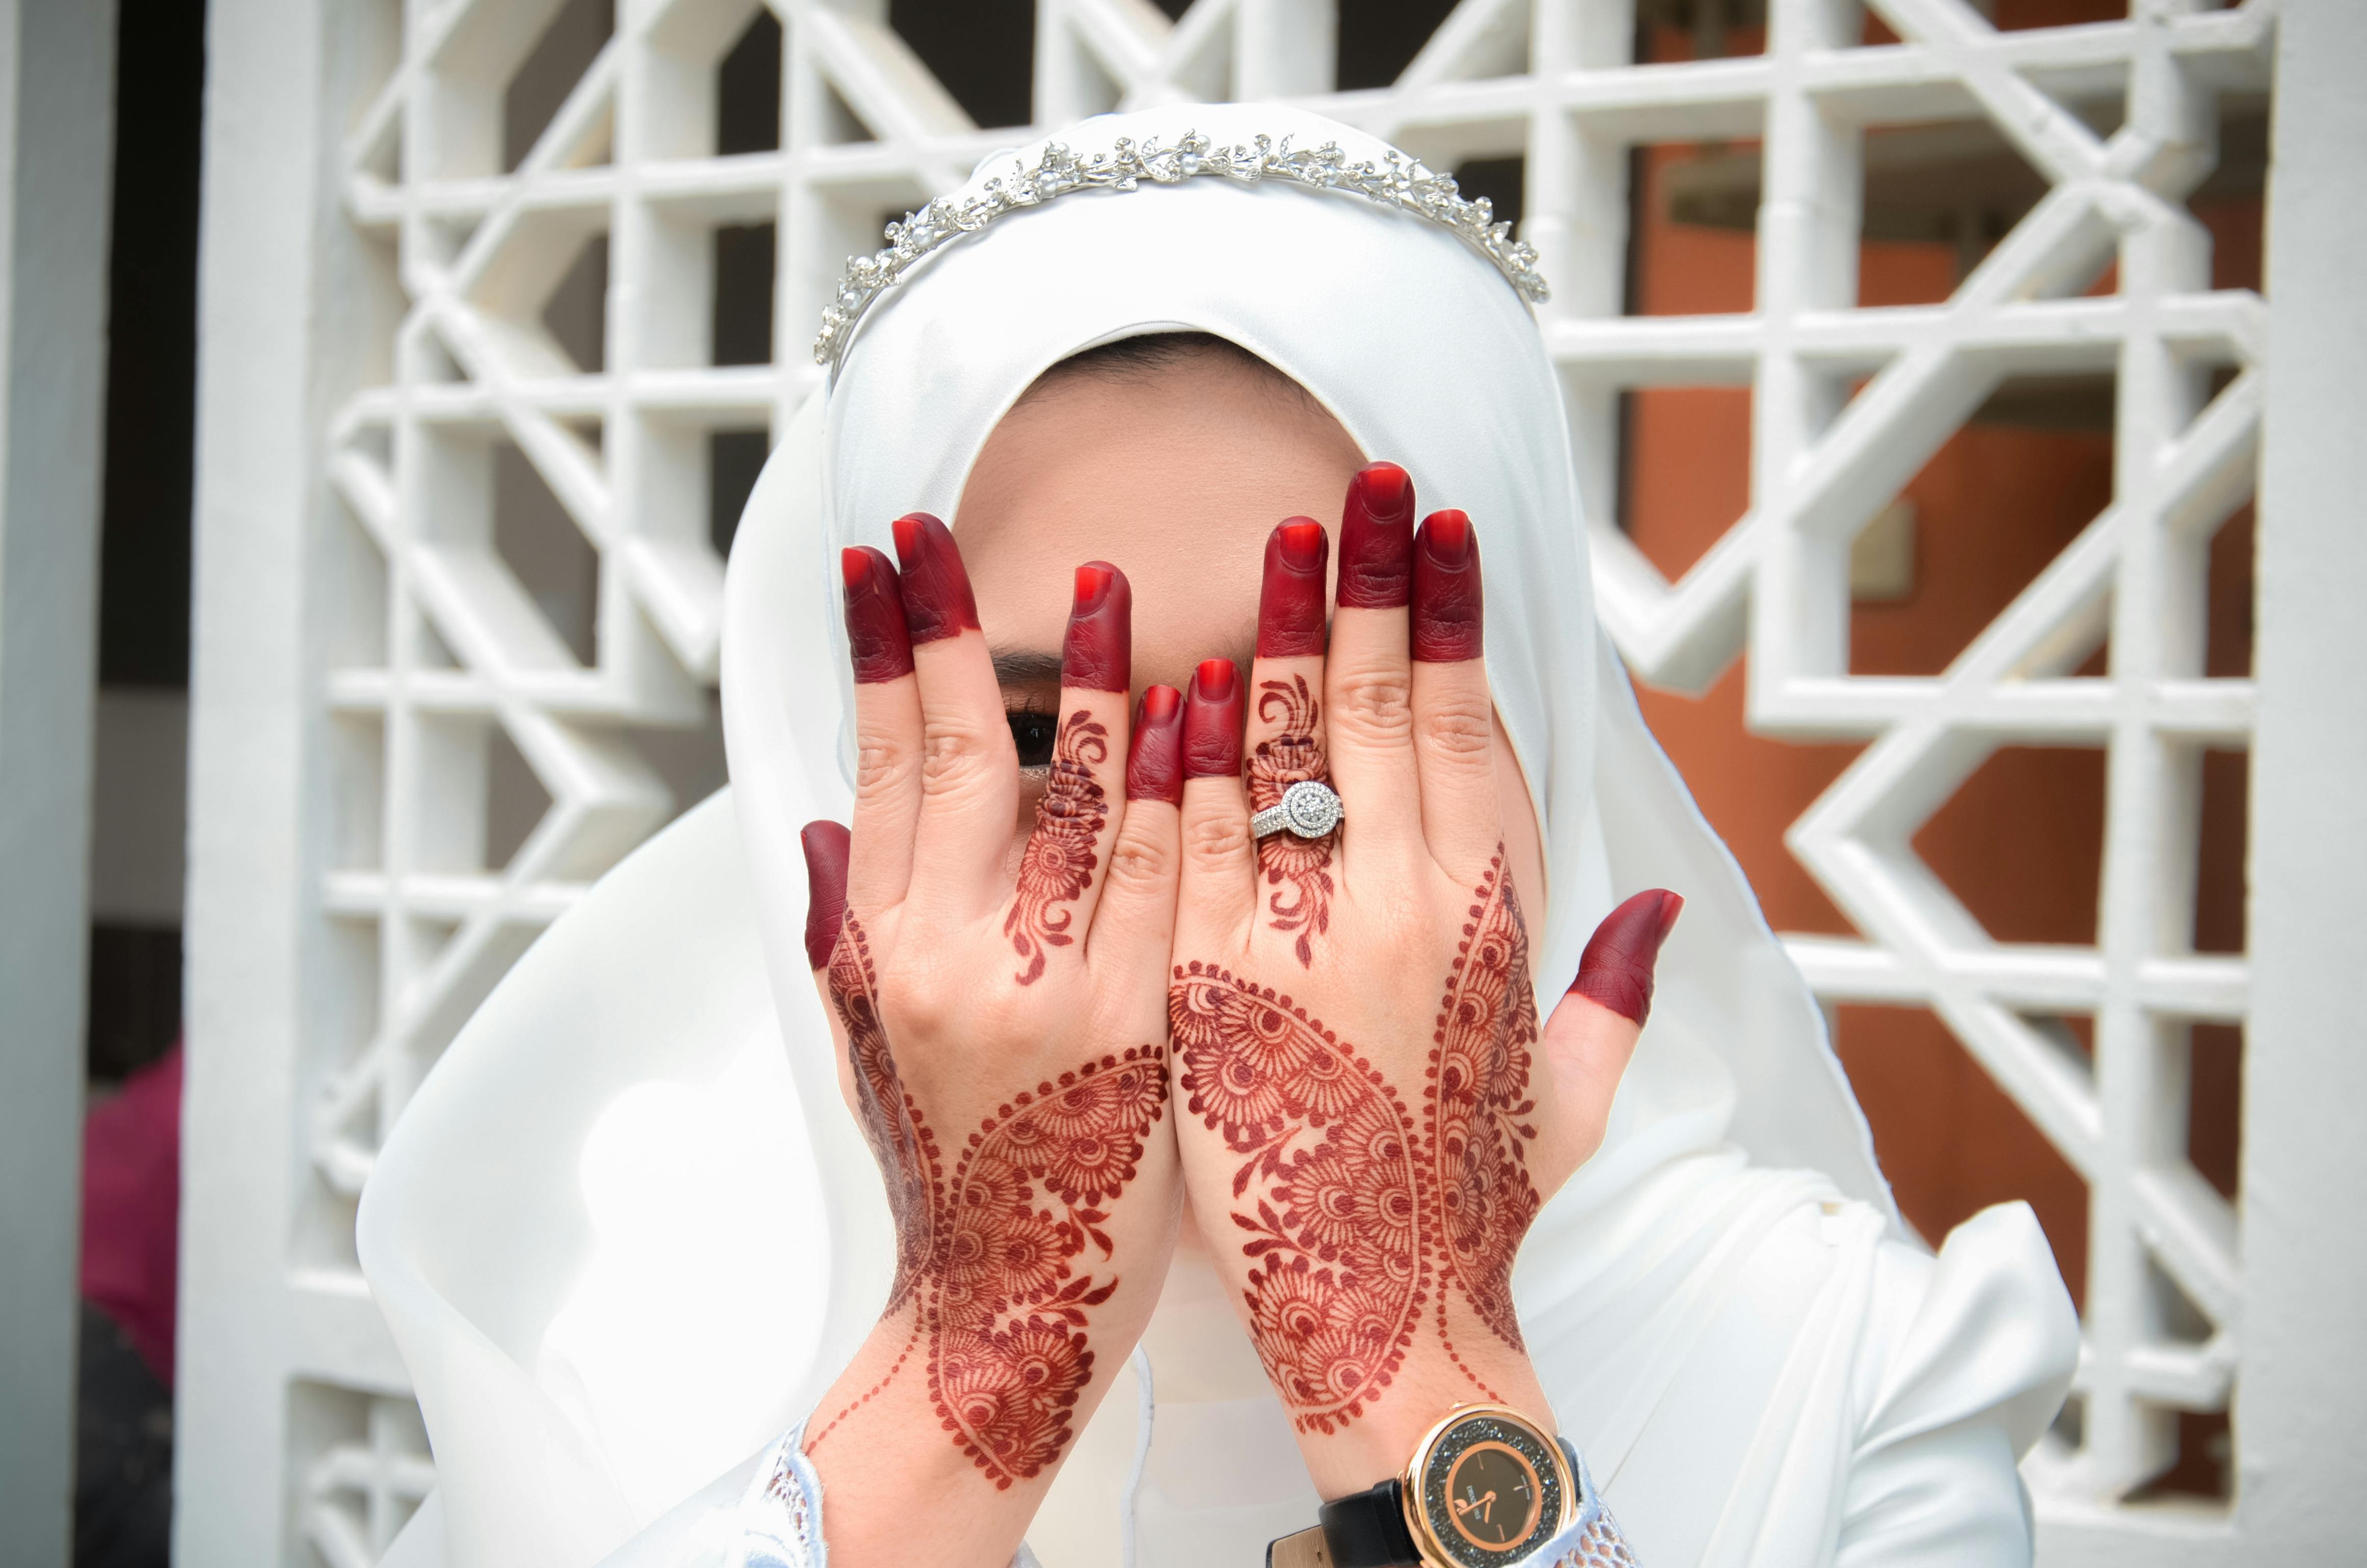 Do you want to get a black henna tattoo? You will think twice after reading  this